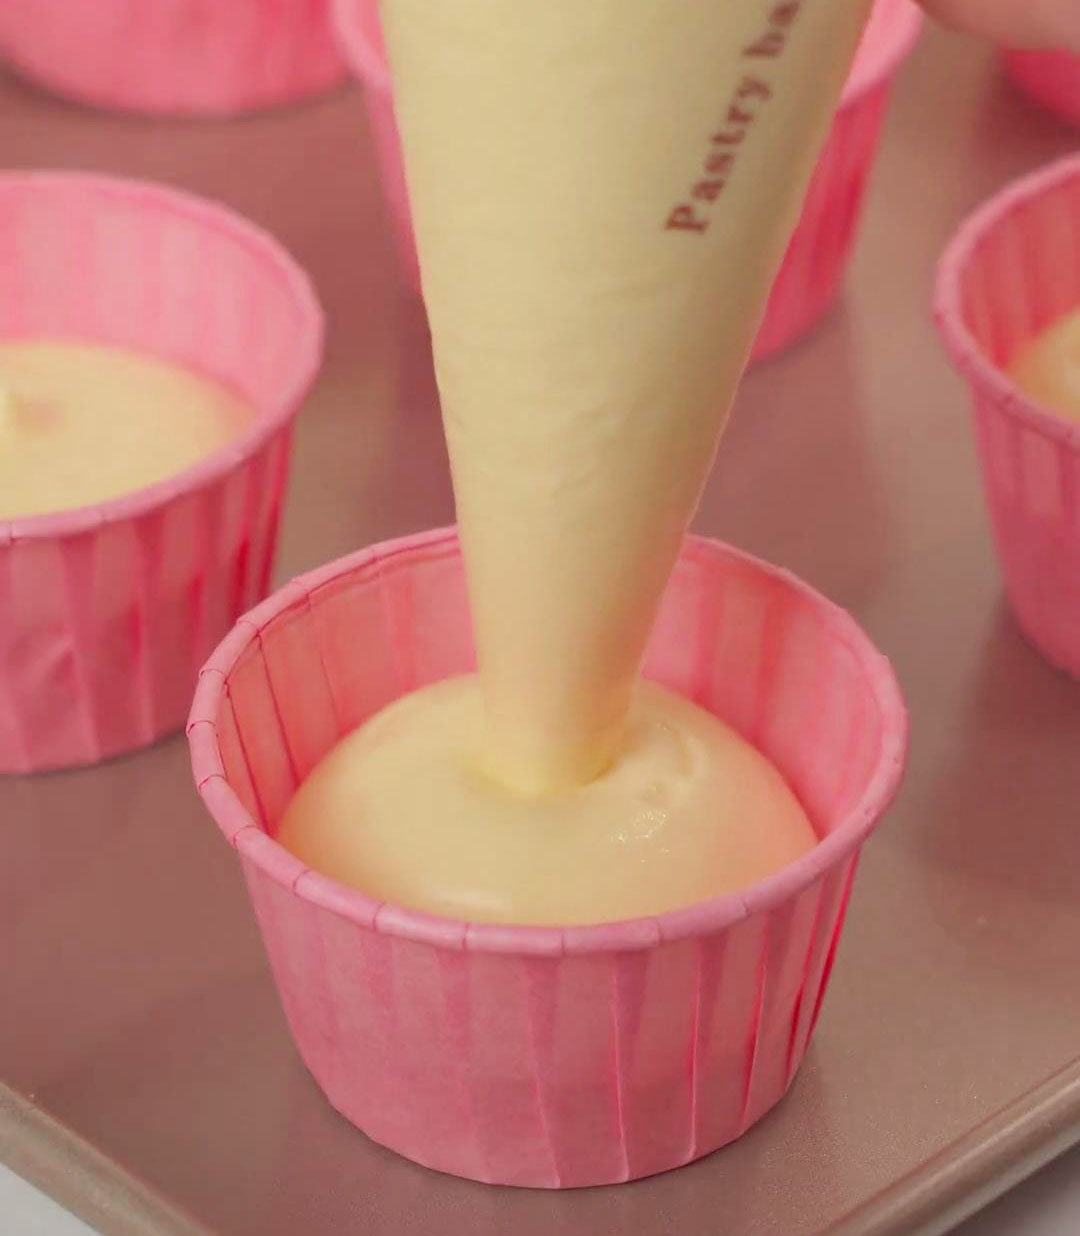 transfer the egg batter into the cupcake mold